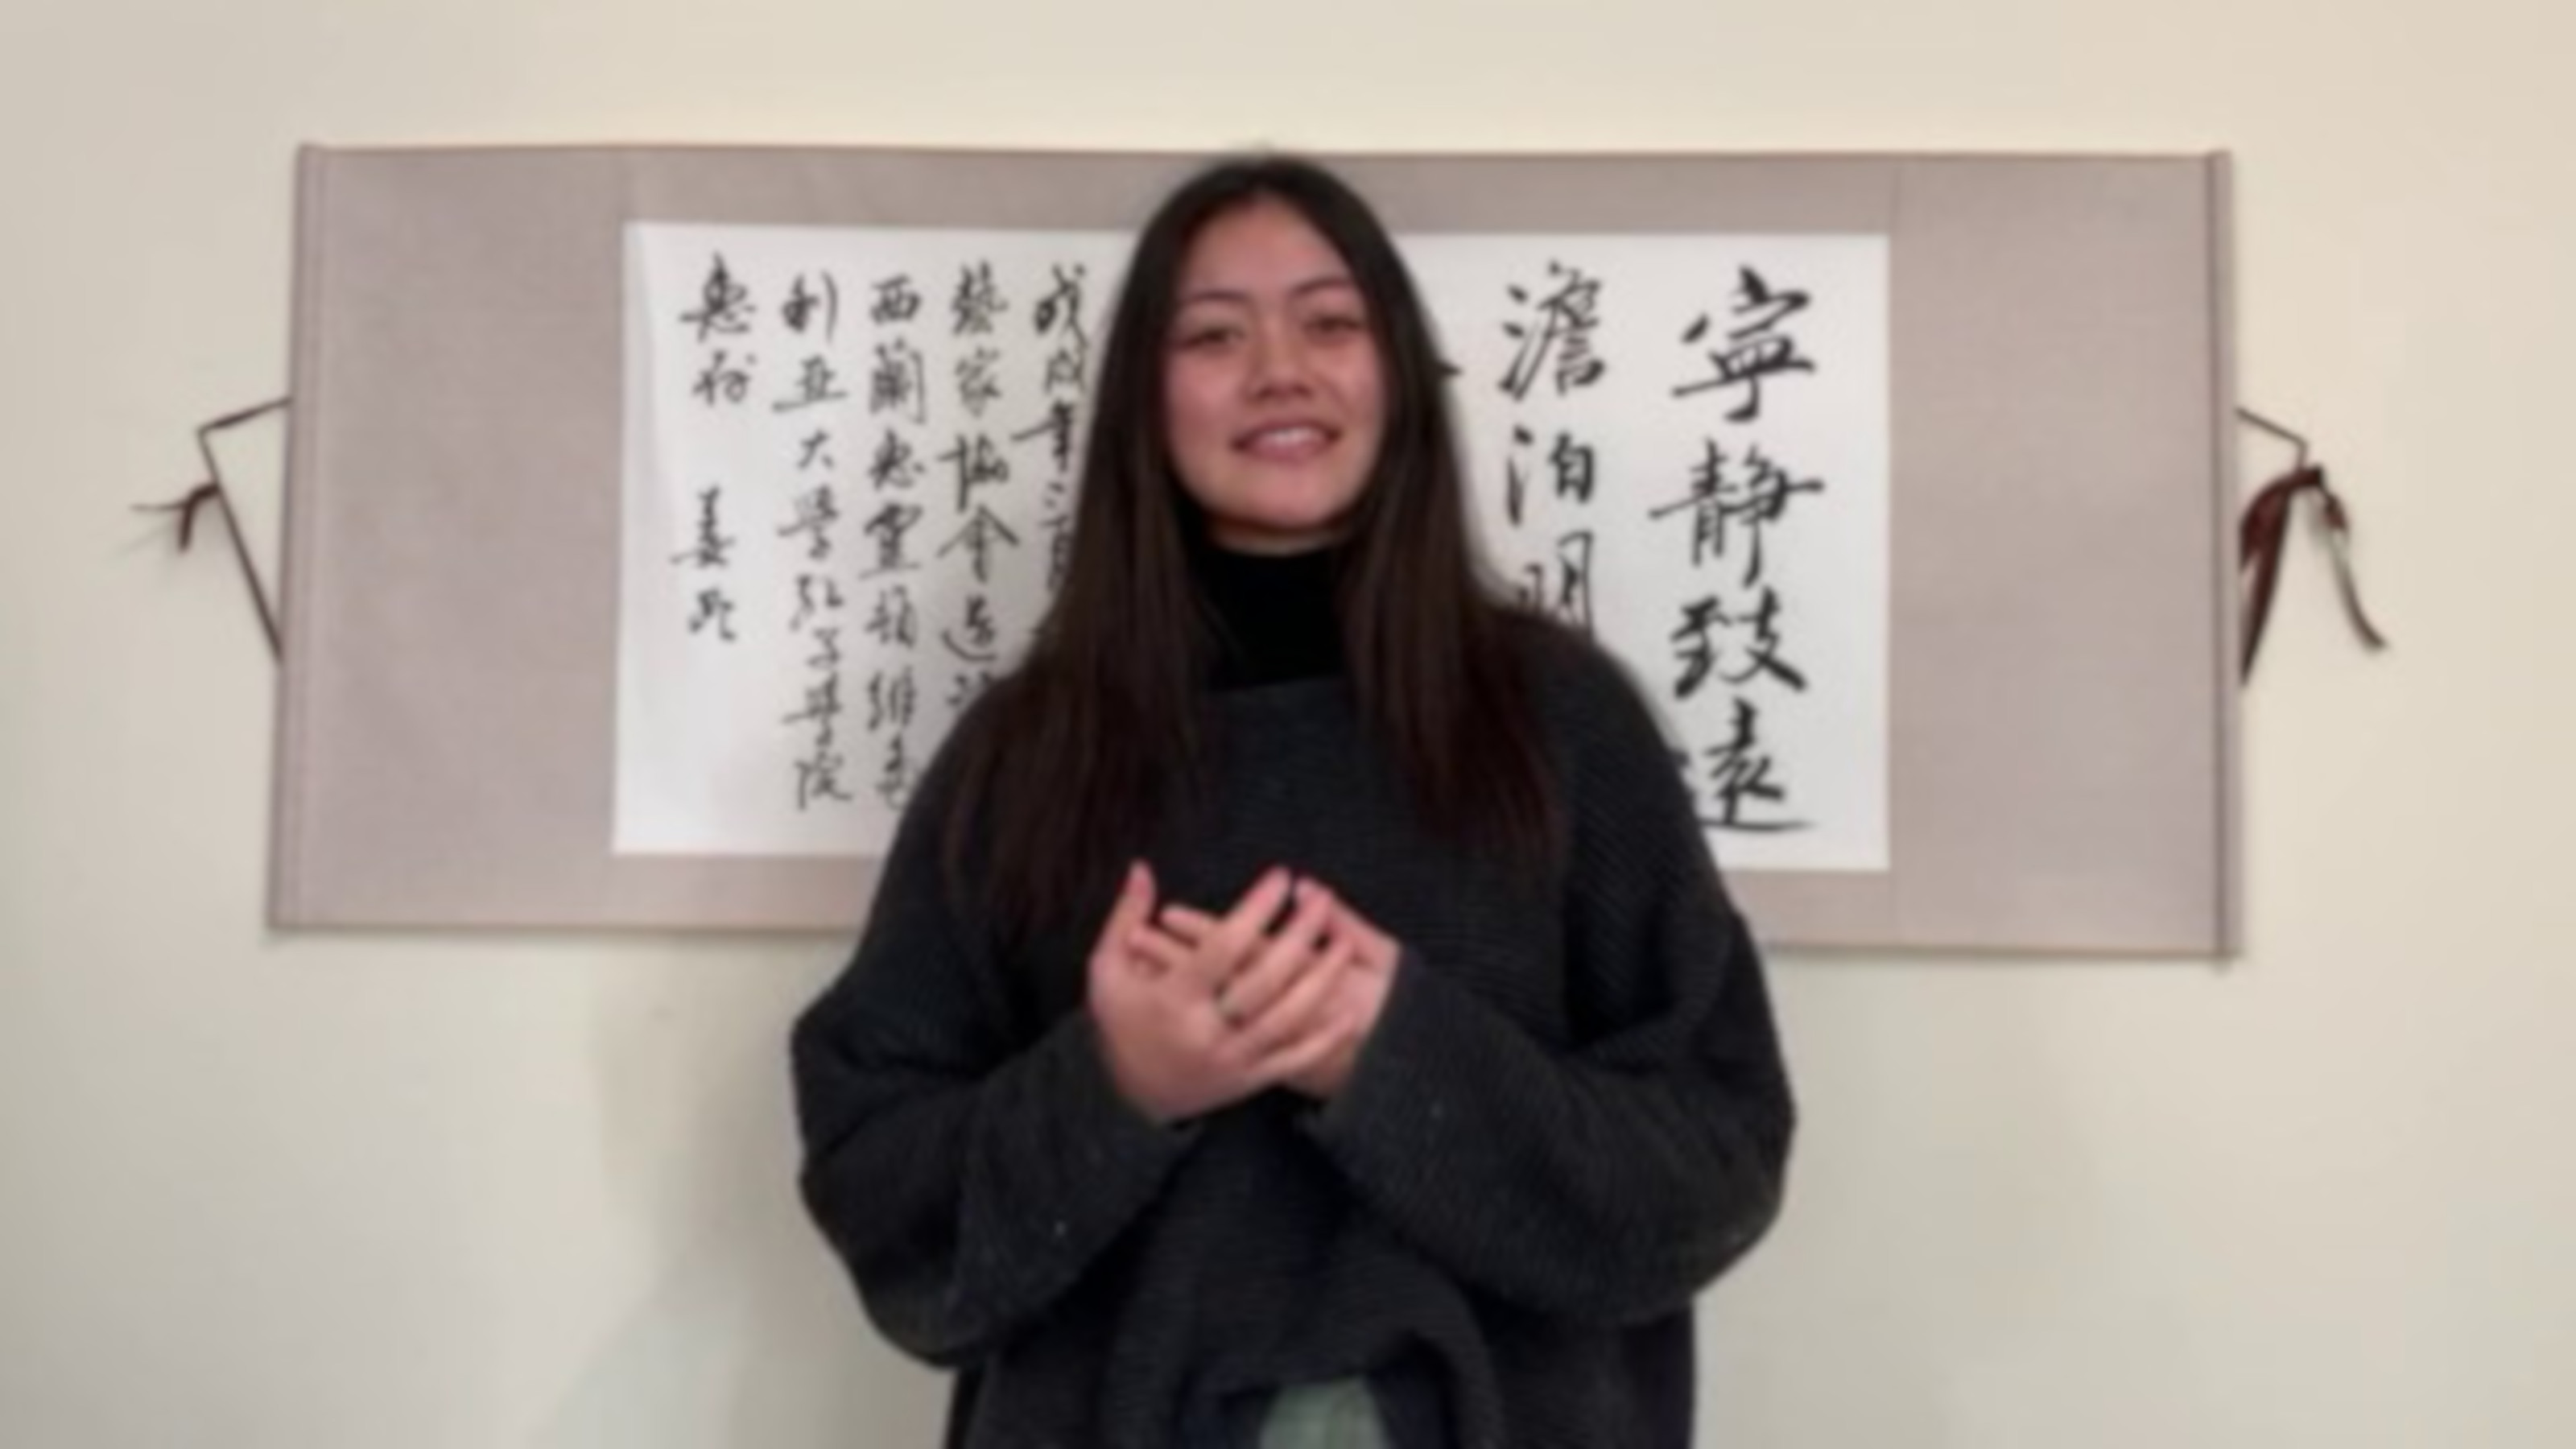 Monica Saili gives her winning speech in front of a piece of Chinese calligraphy